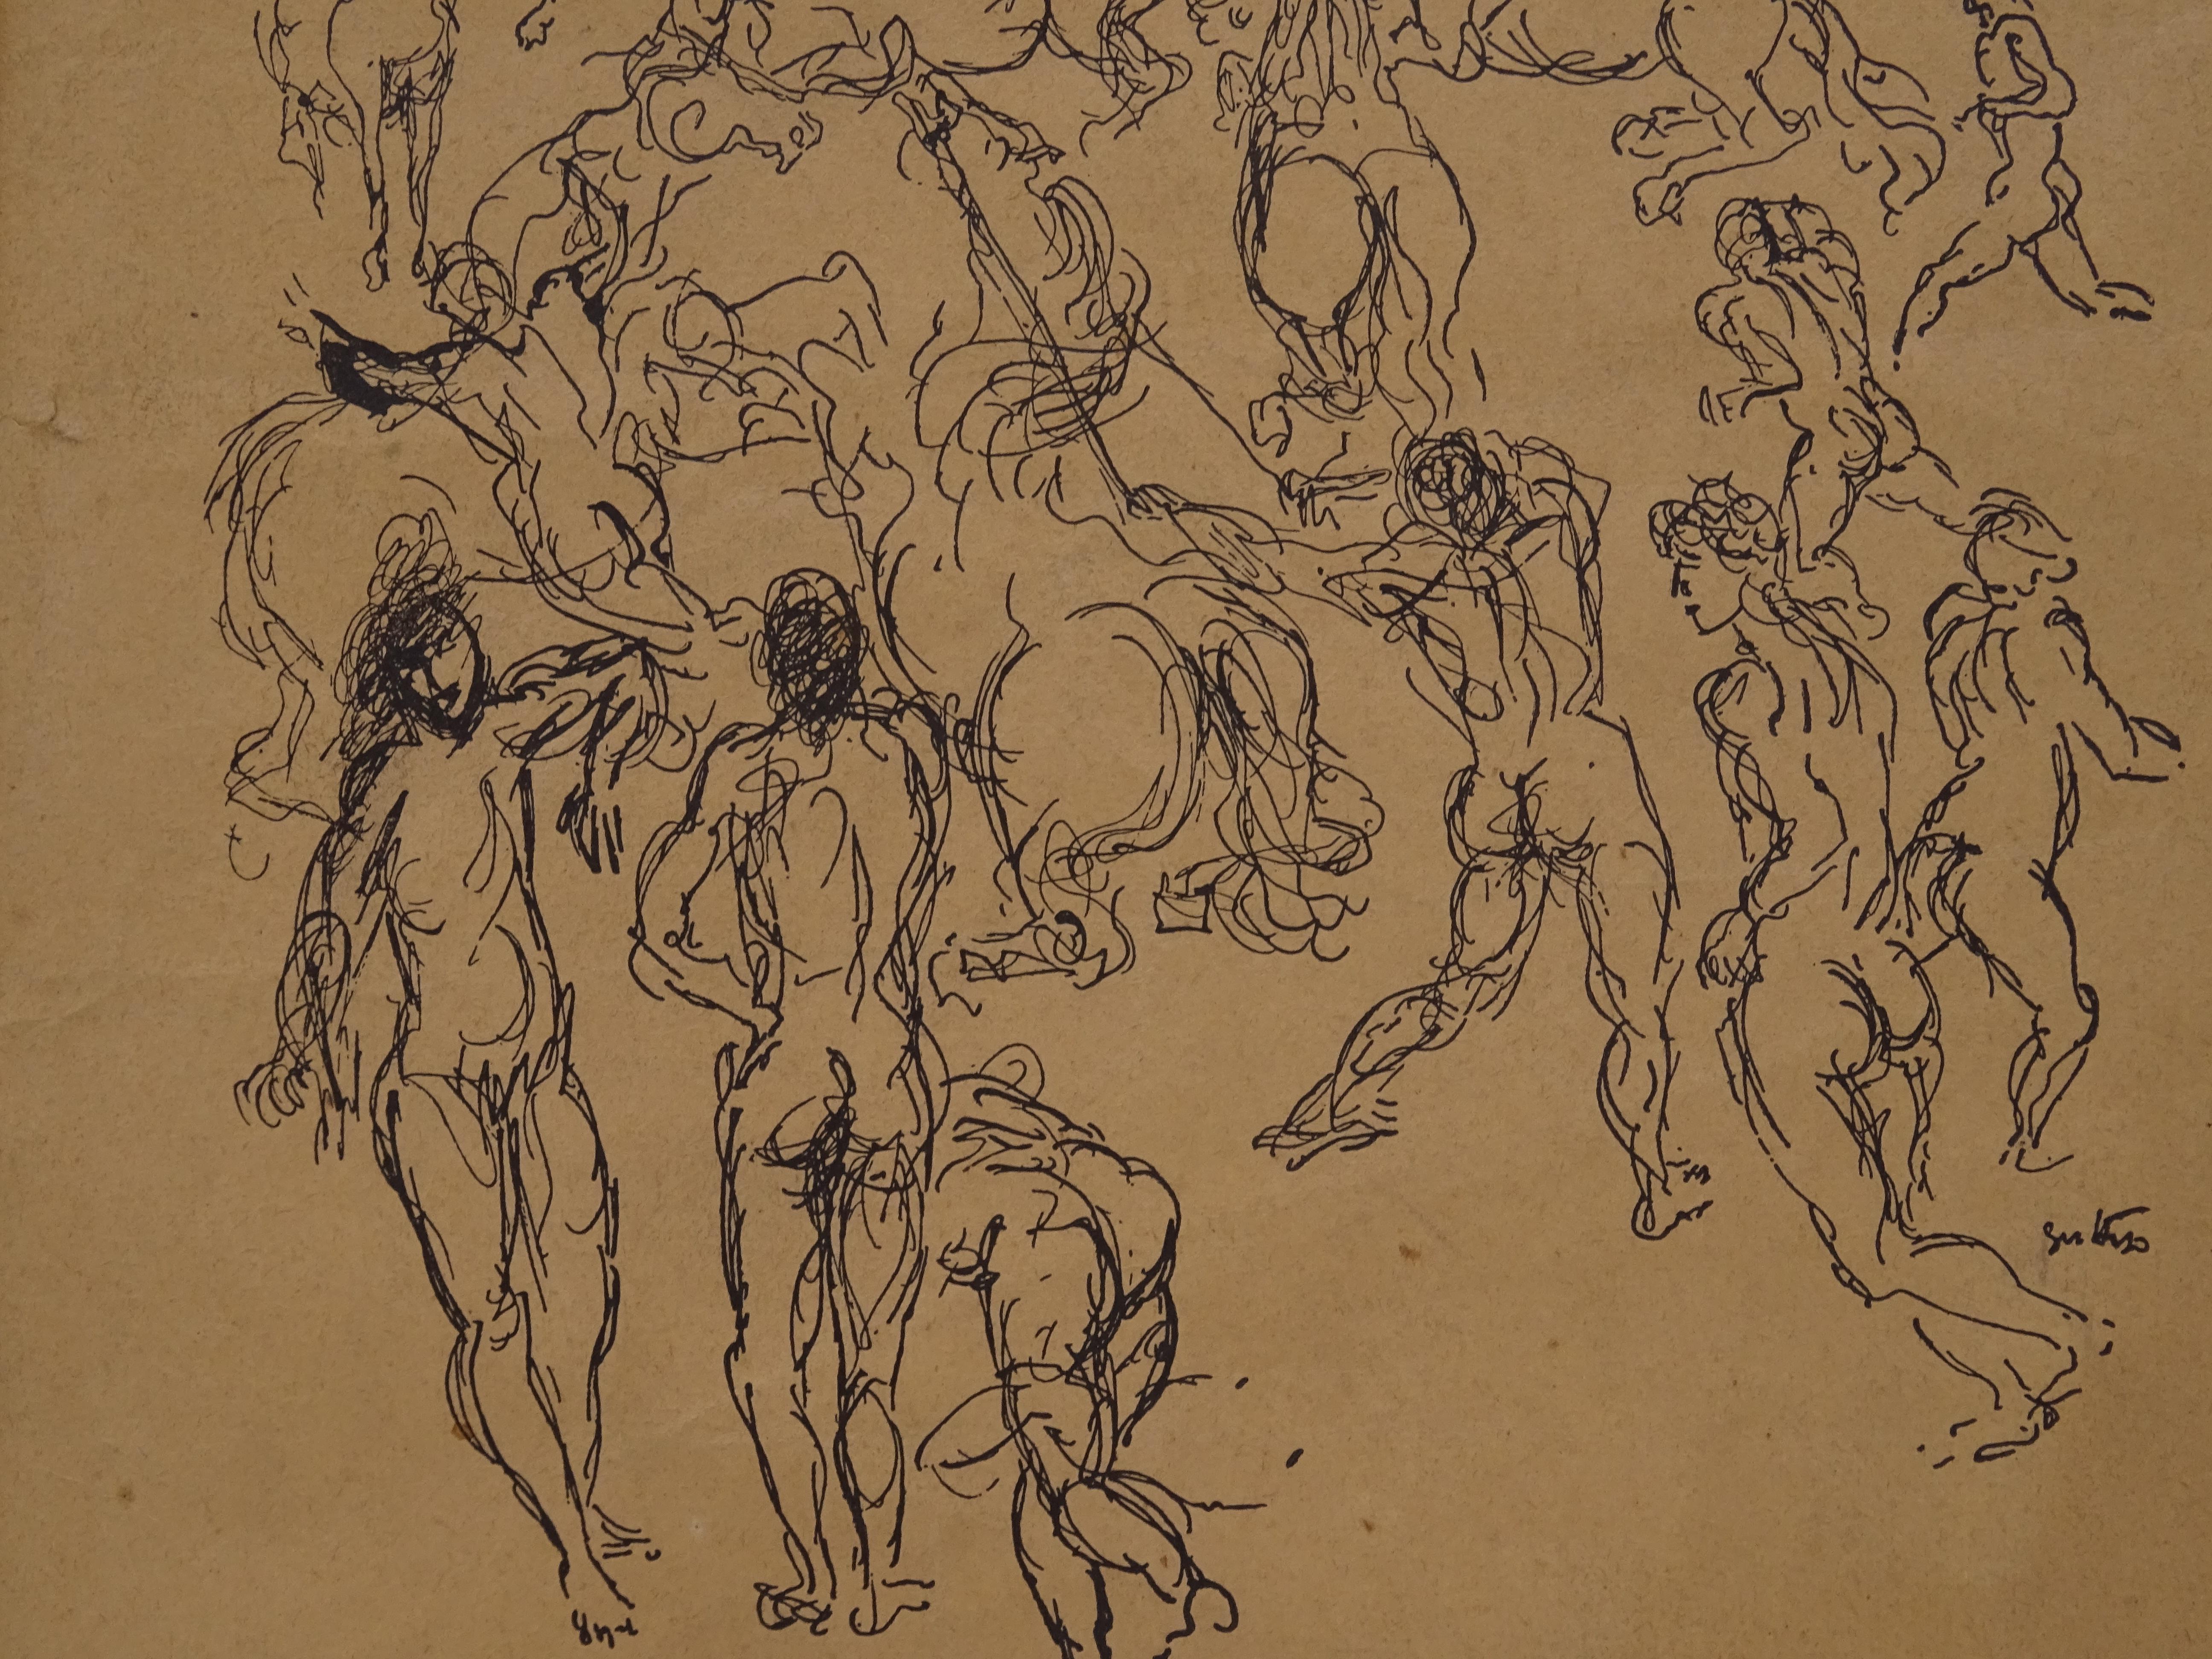 The work in question is an ink drawing on paper, 25 cm long and 35 cm high with a passe-partout card, depicting a chaotic array of nude body figures and horses. The work is in good condition, can be dated to around 1930 and is signed Guttuso in the